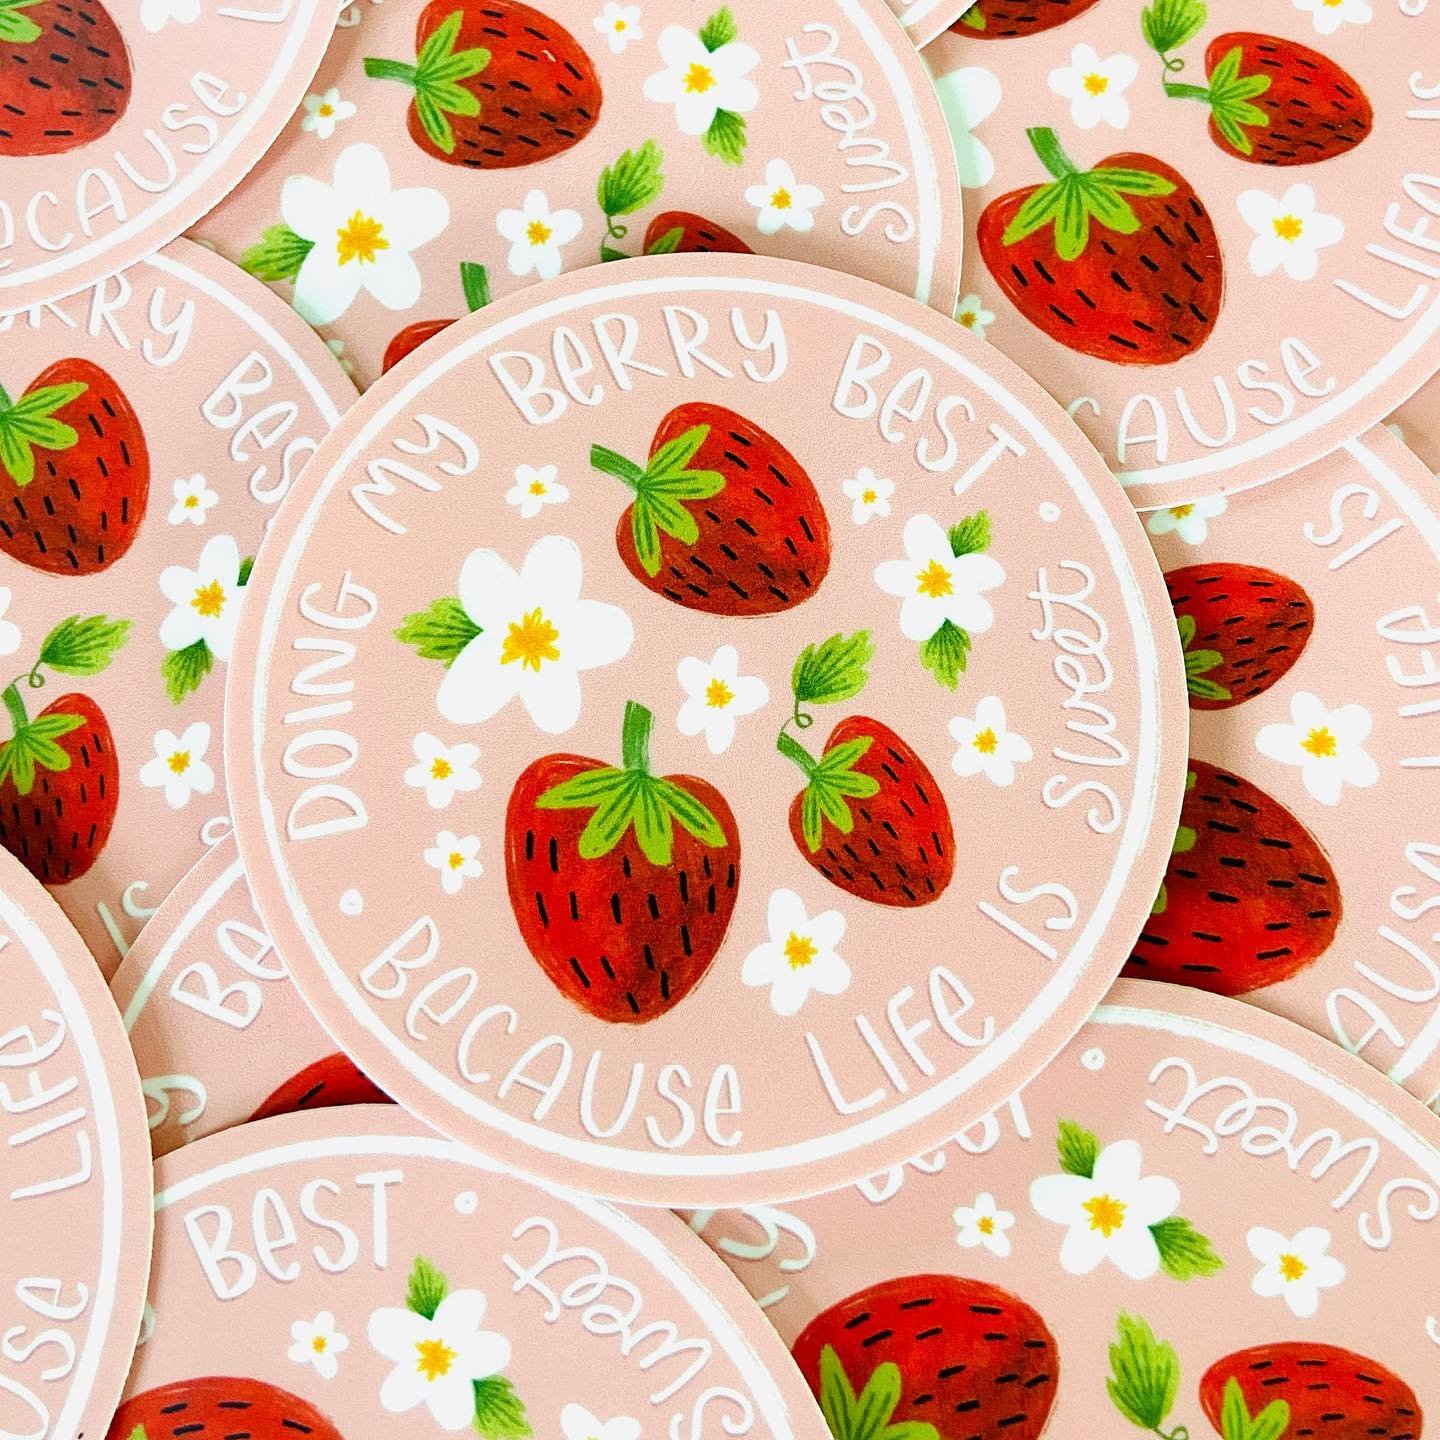 ✨New Sticker Drop!✨ 🍓🍓🍓 stickers just listed on Etsy and available to retailers via Faire wholesale! These cute stickers are vintage inspired and coordinate with my newest Mother&rsquo;s Day, birthday and teacher appreciation greeting cards! 💐✏️?